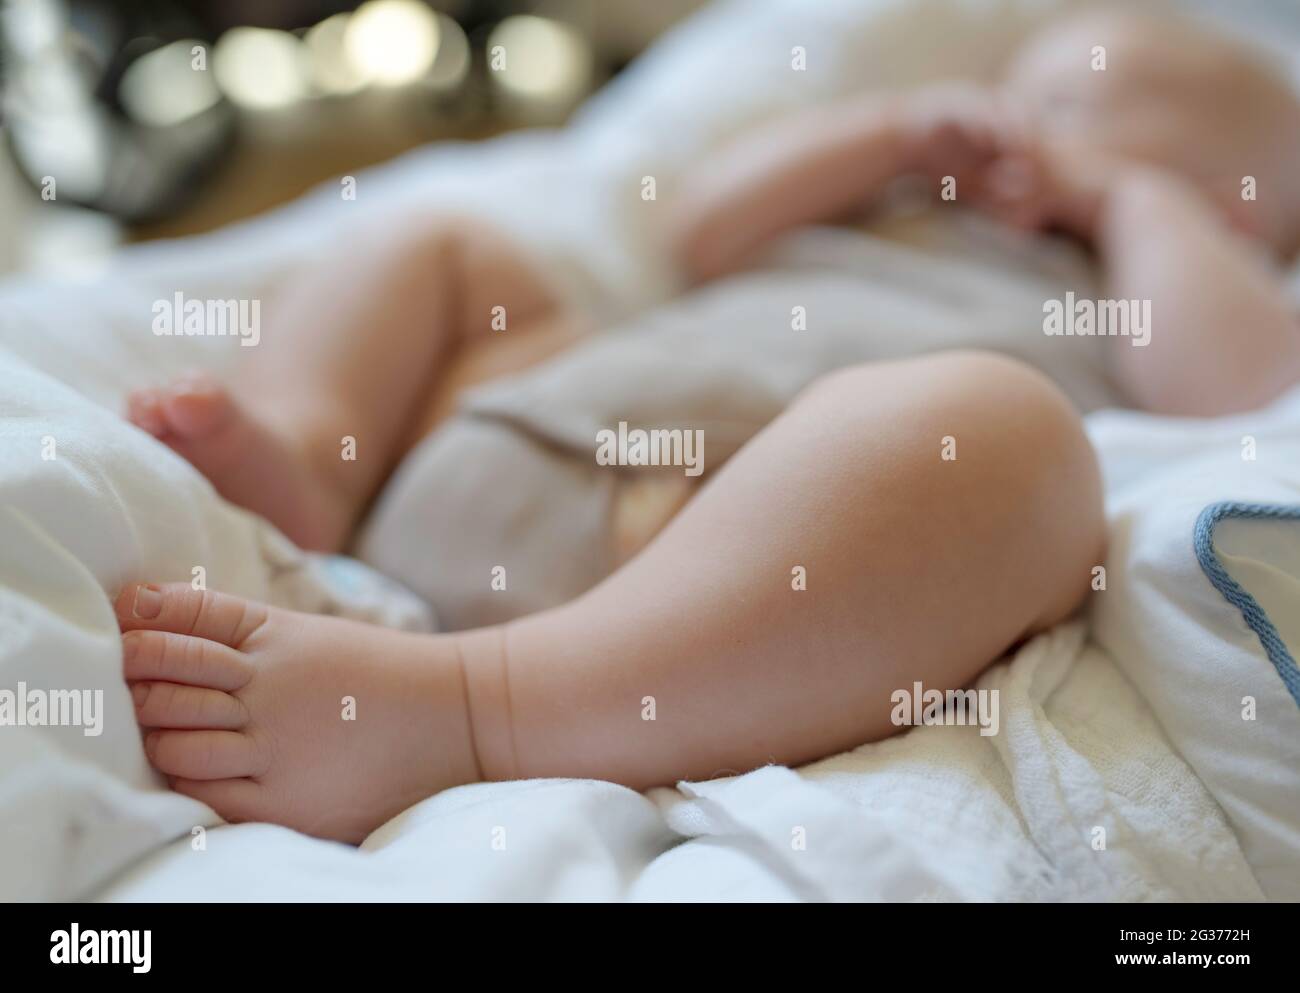 close-up of 3 month old baby sleeping in bodysuit, focus on feet Stock Photo